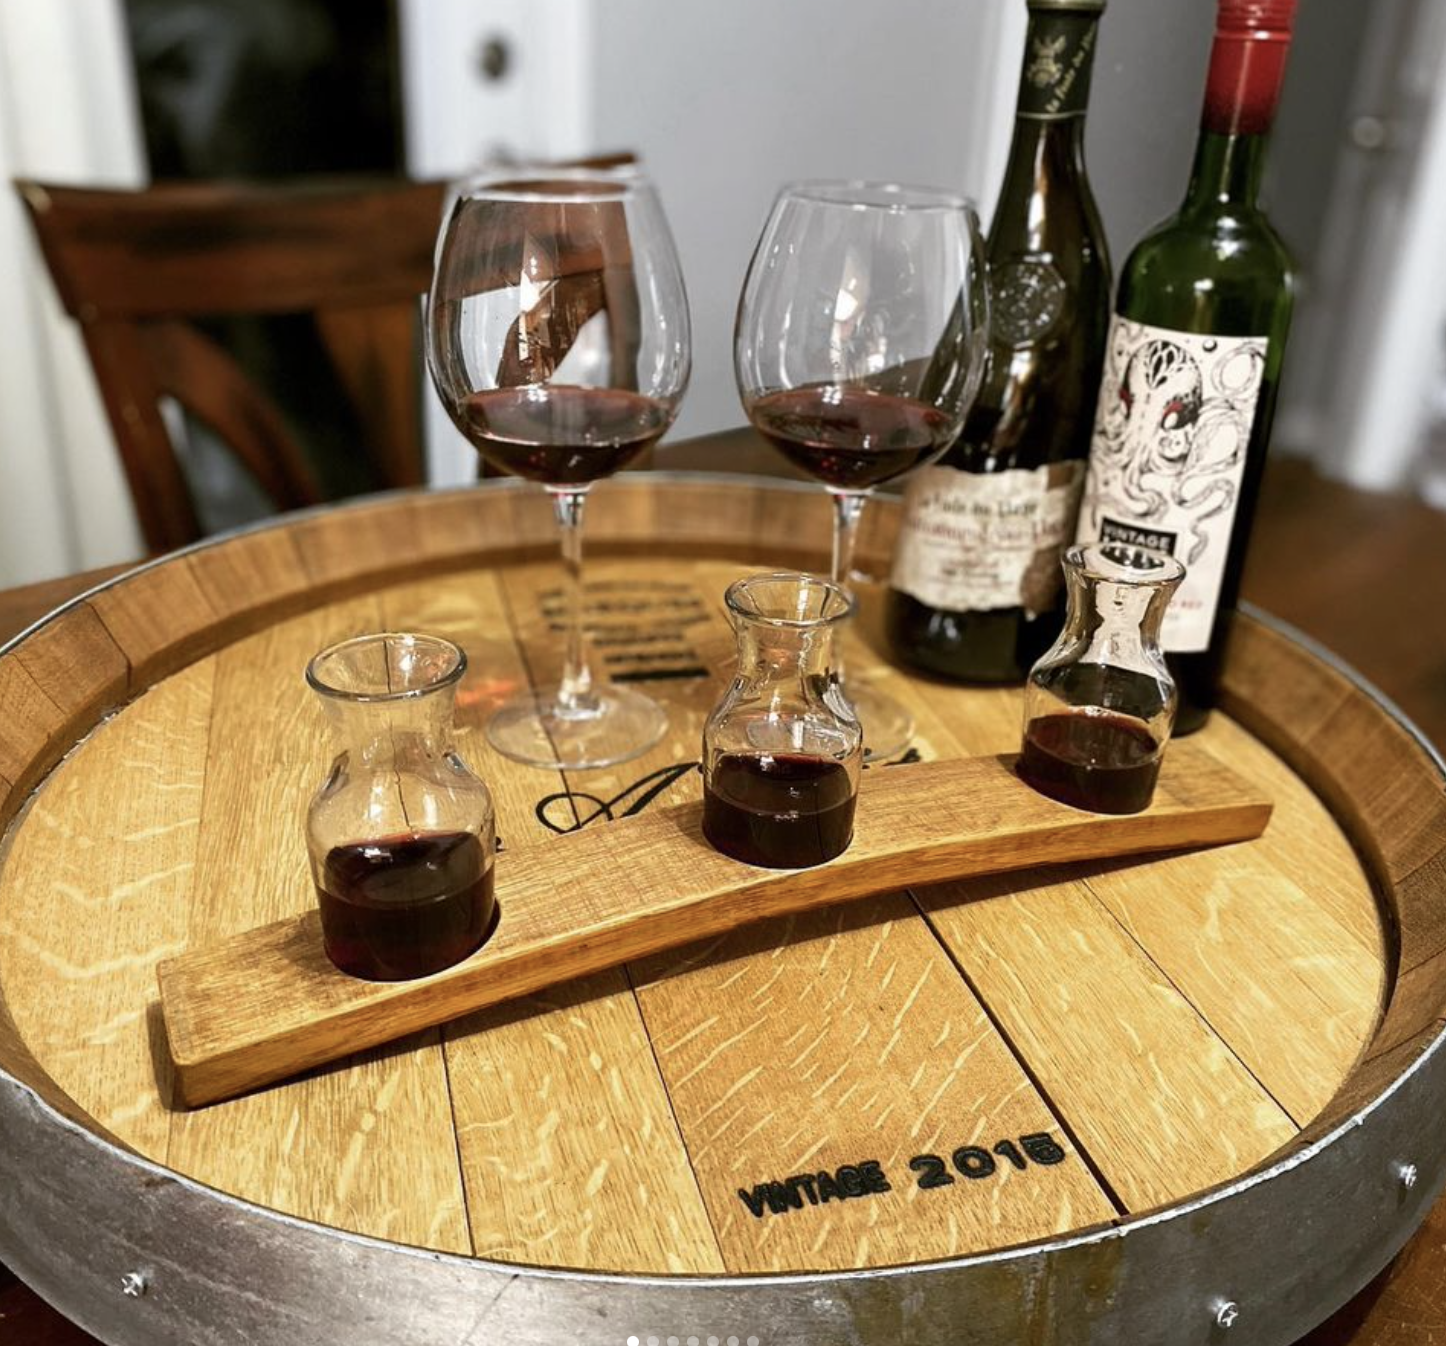 A wooden flight board holding 3 small carafes of wine on top of a wooden wine cask, with wine bottles and glasses in the background.